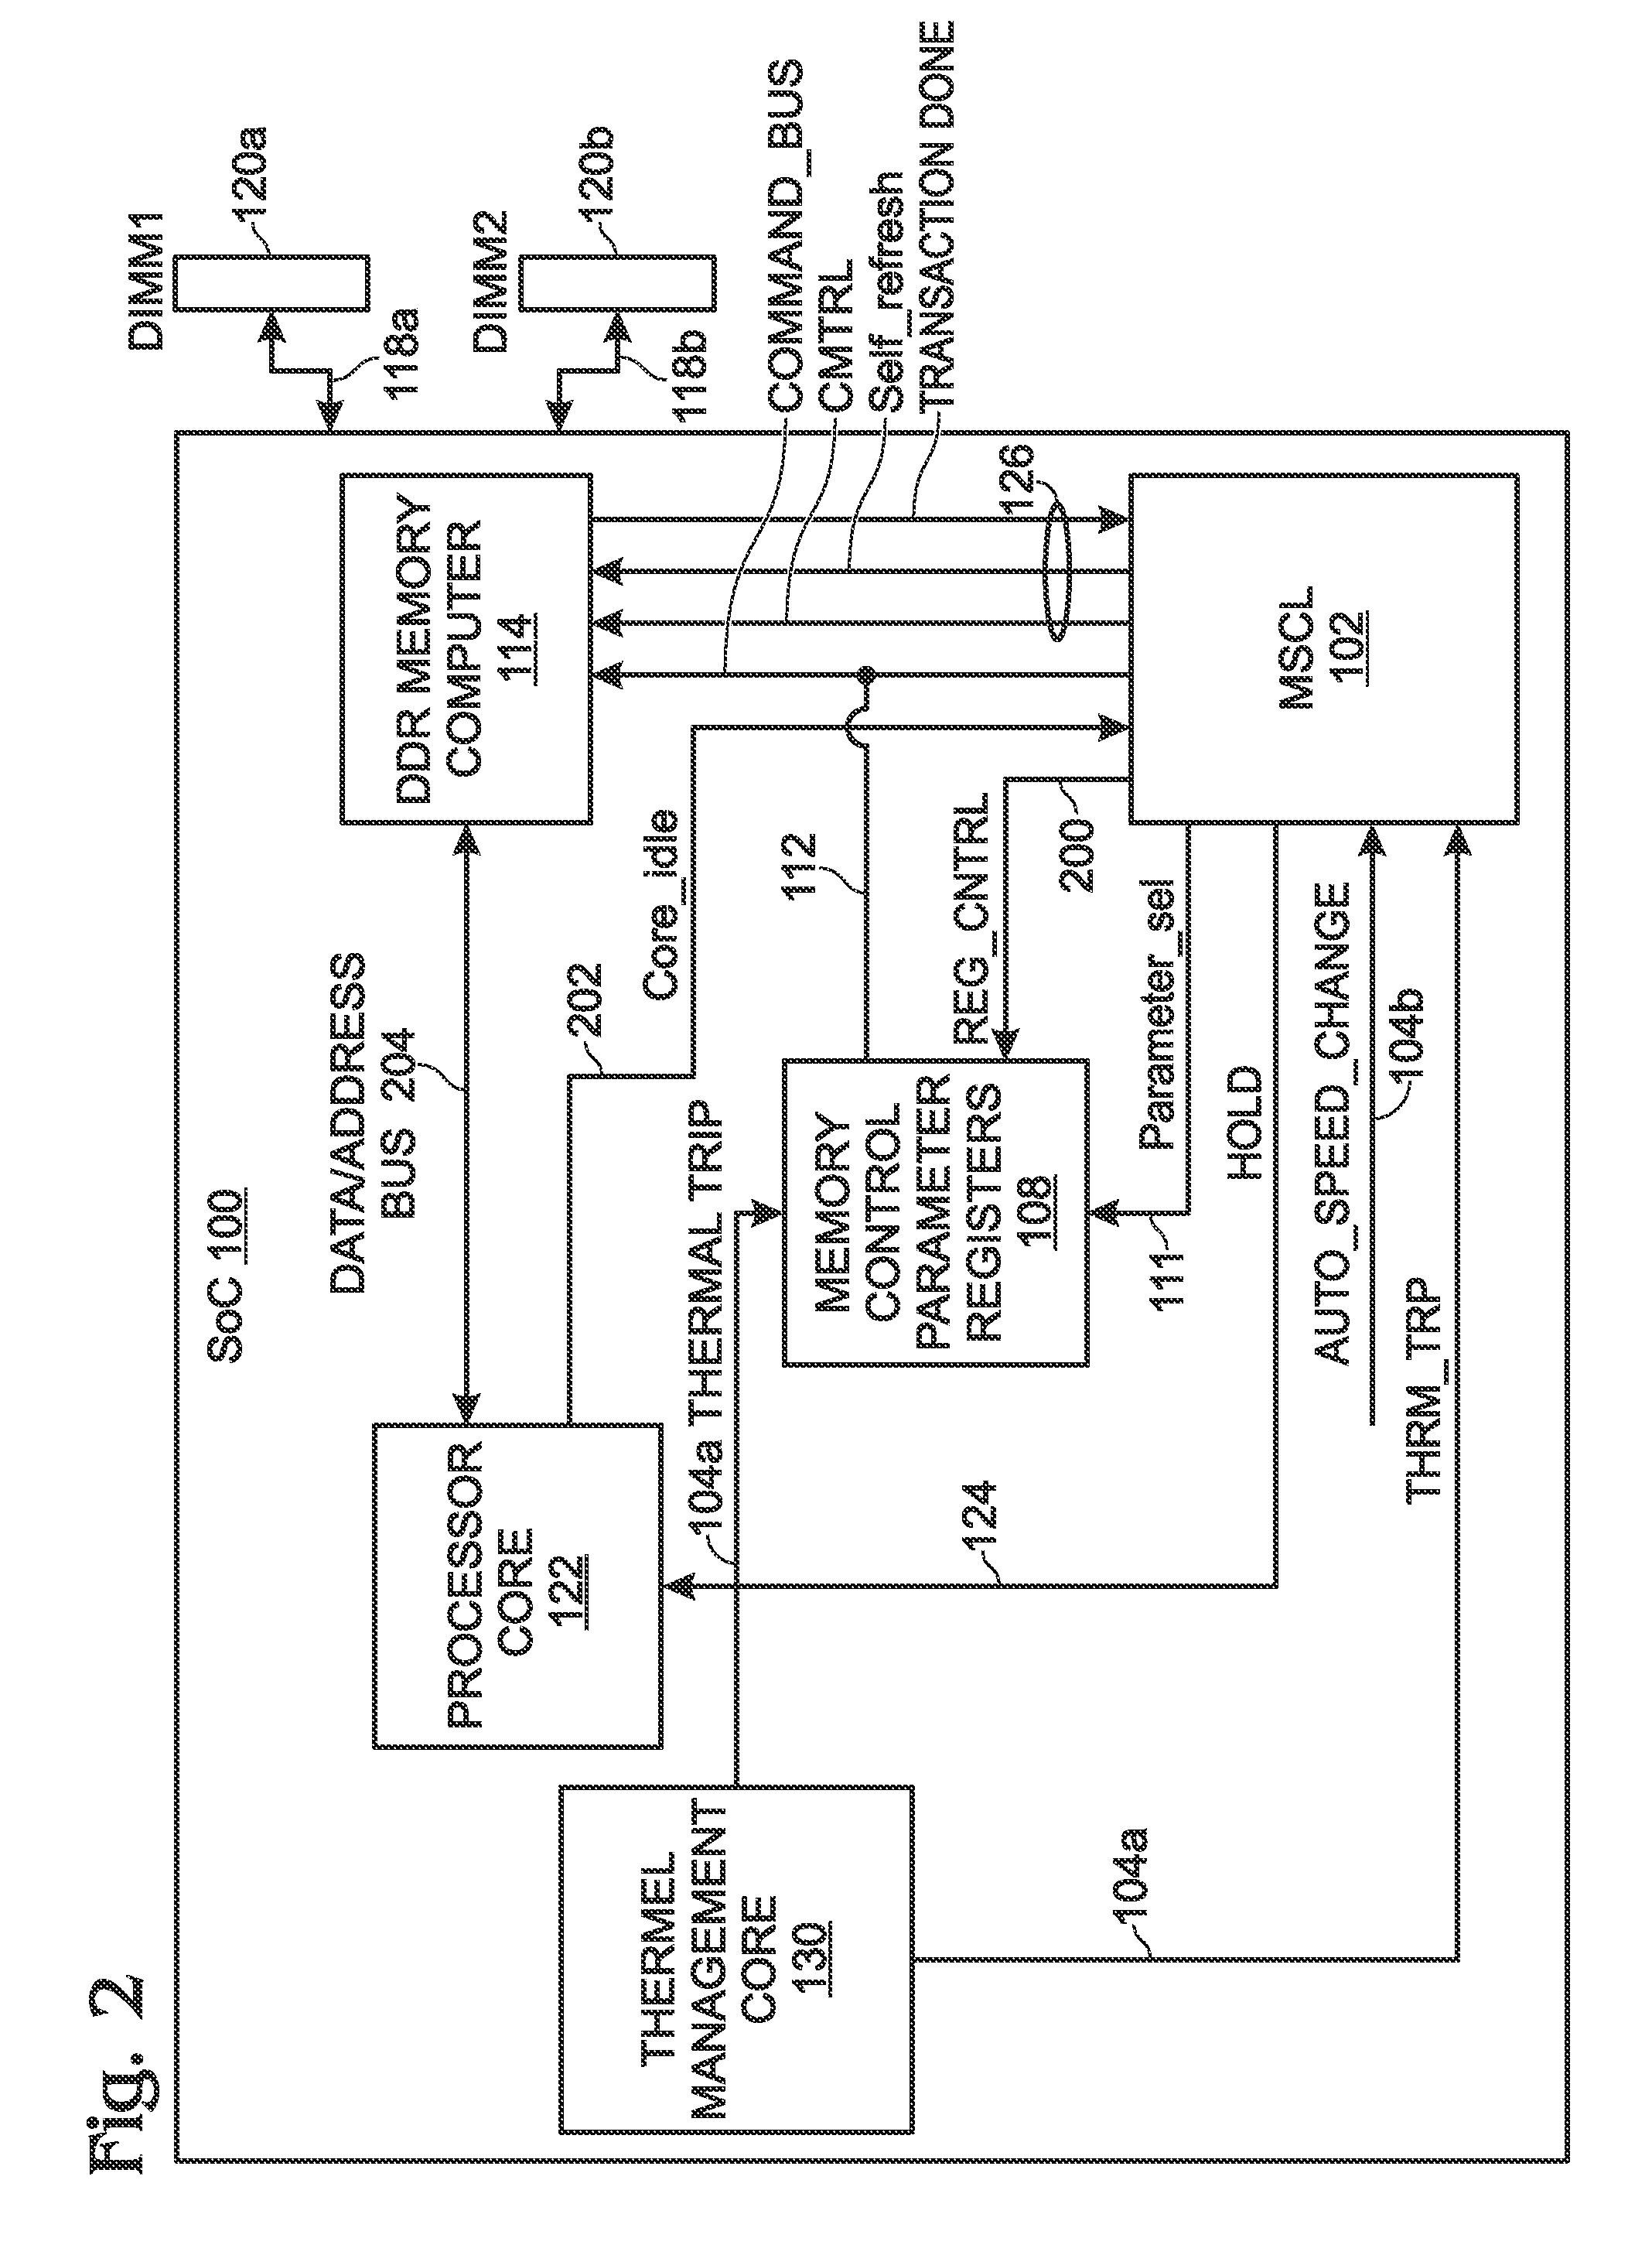 System-on-chip with memory speed control core